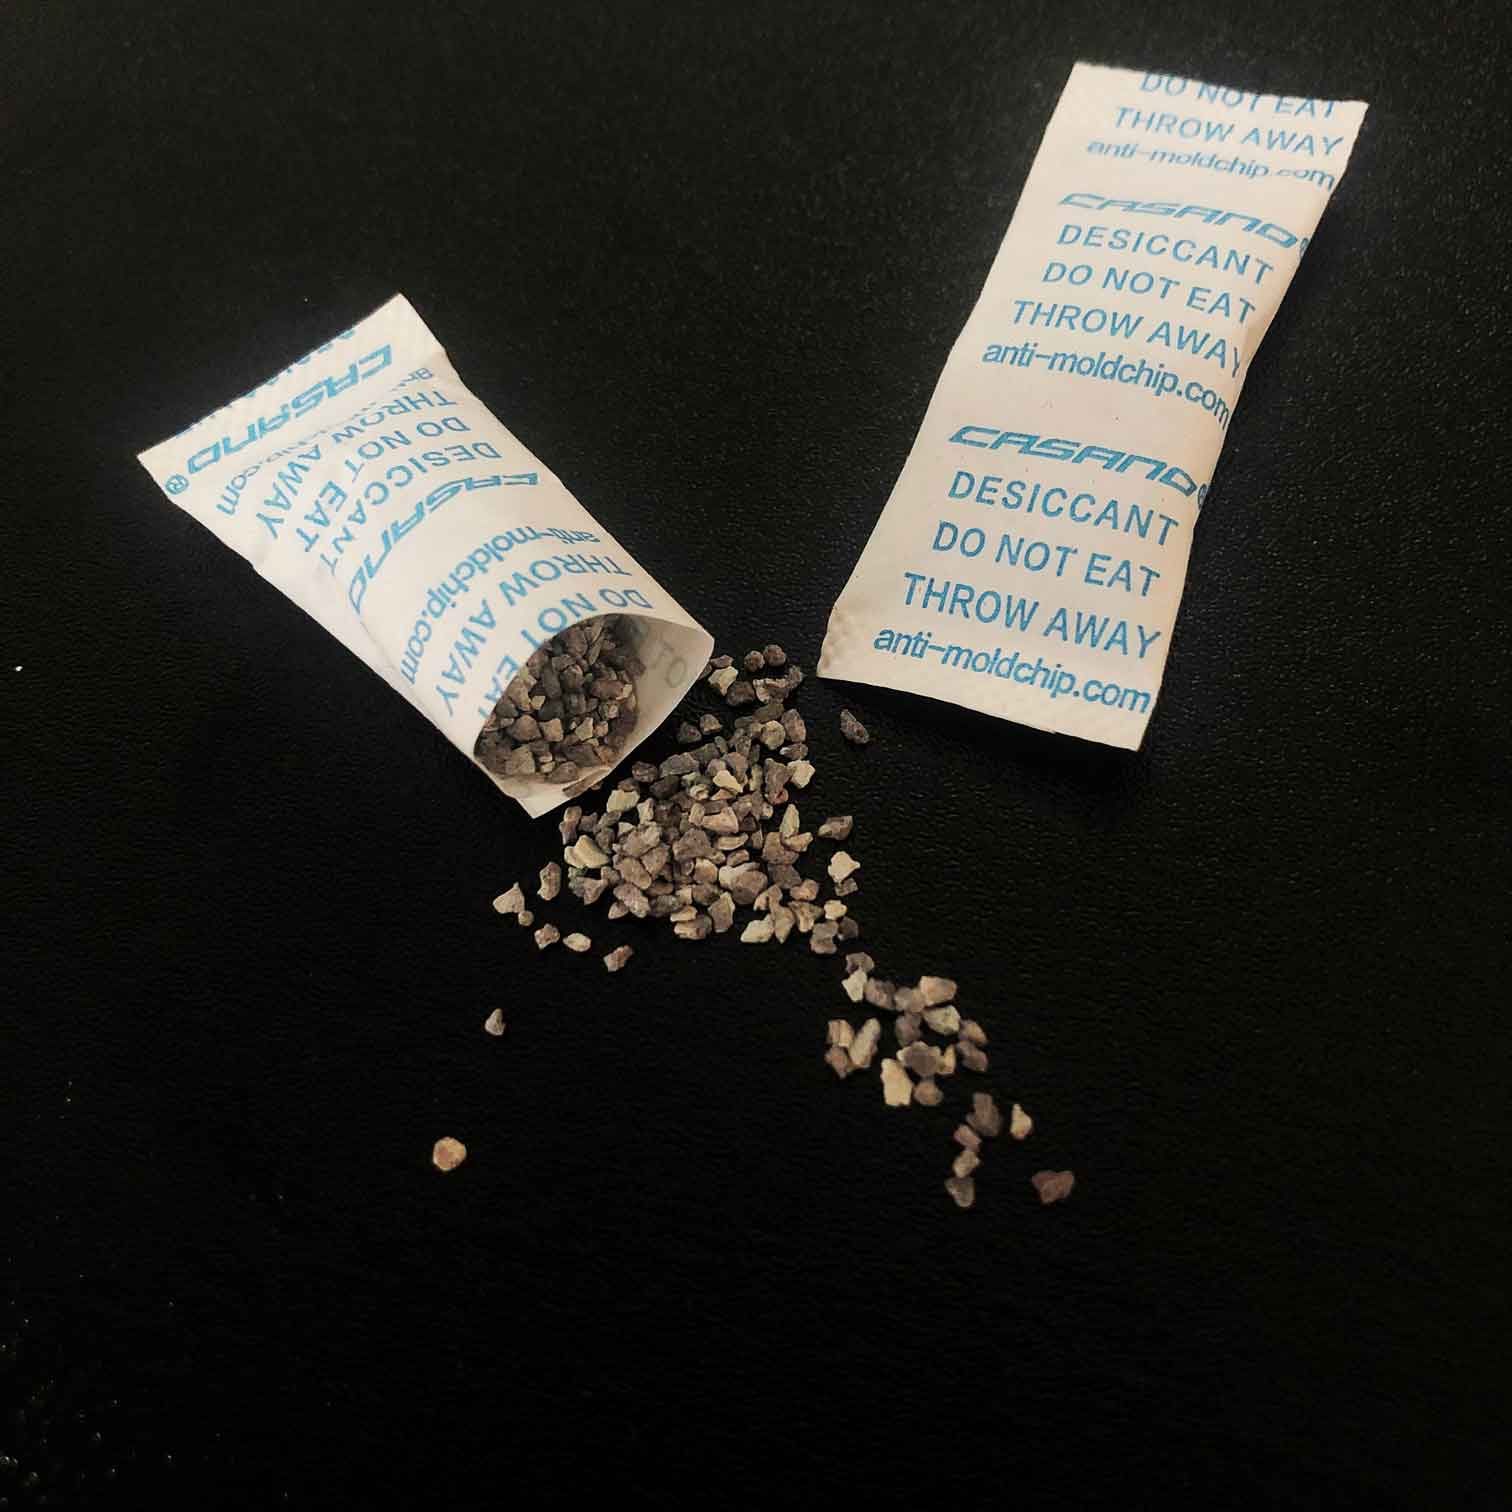 How to judge the quality of industrial desiccant